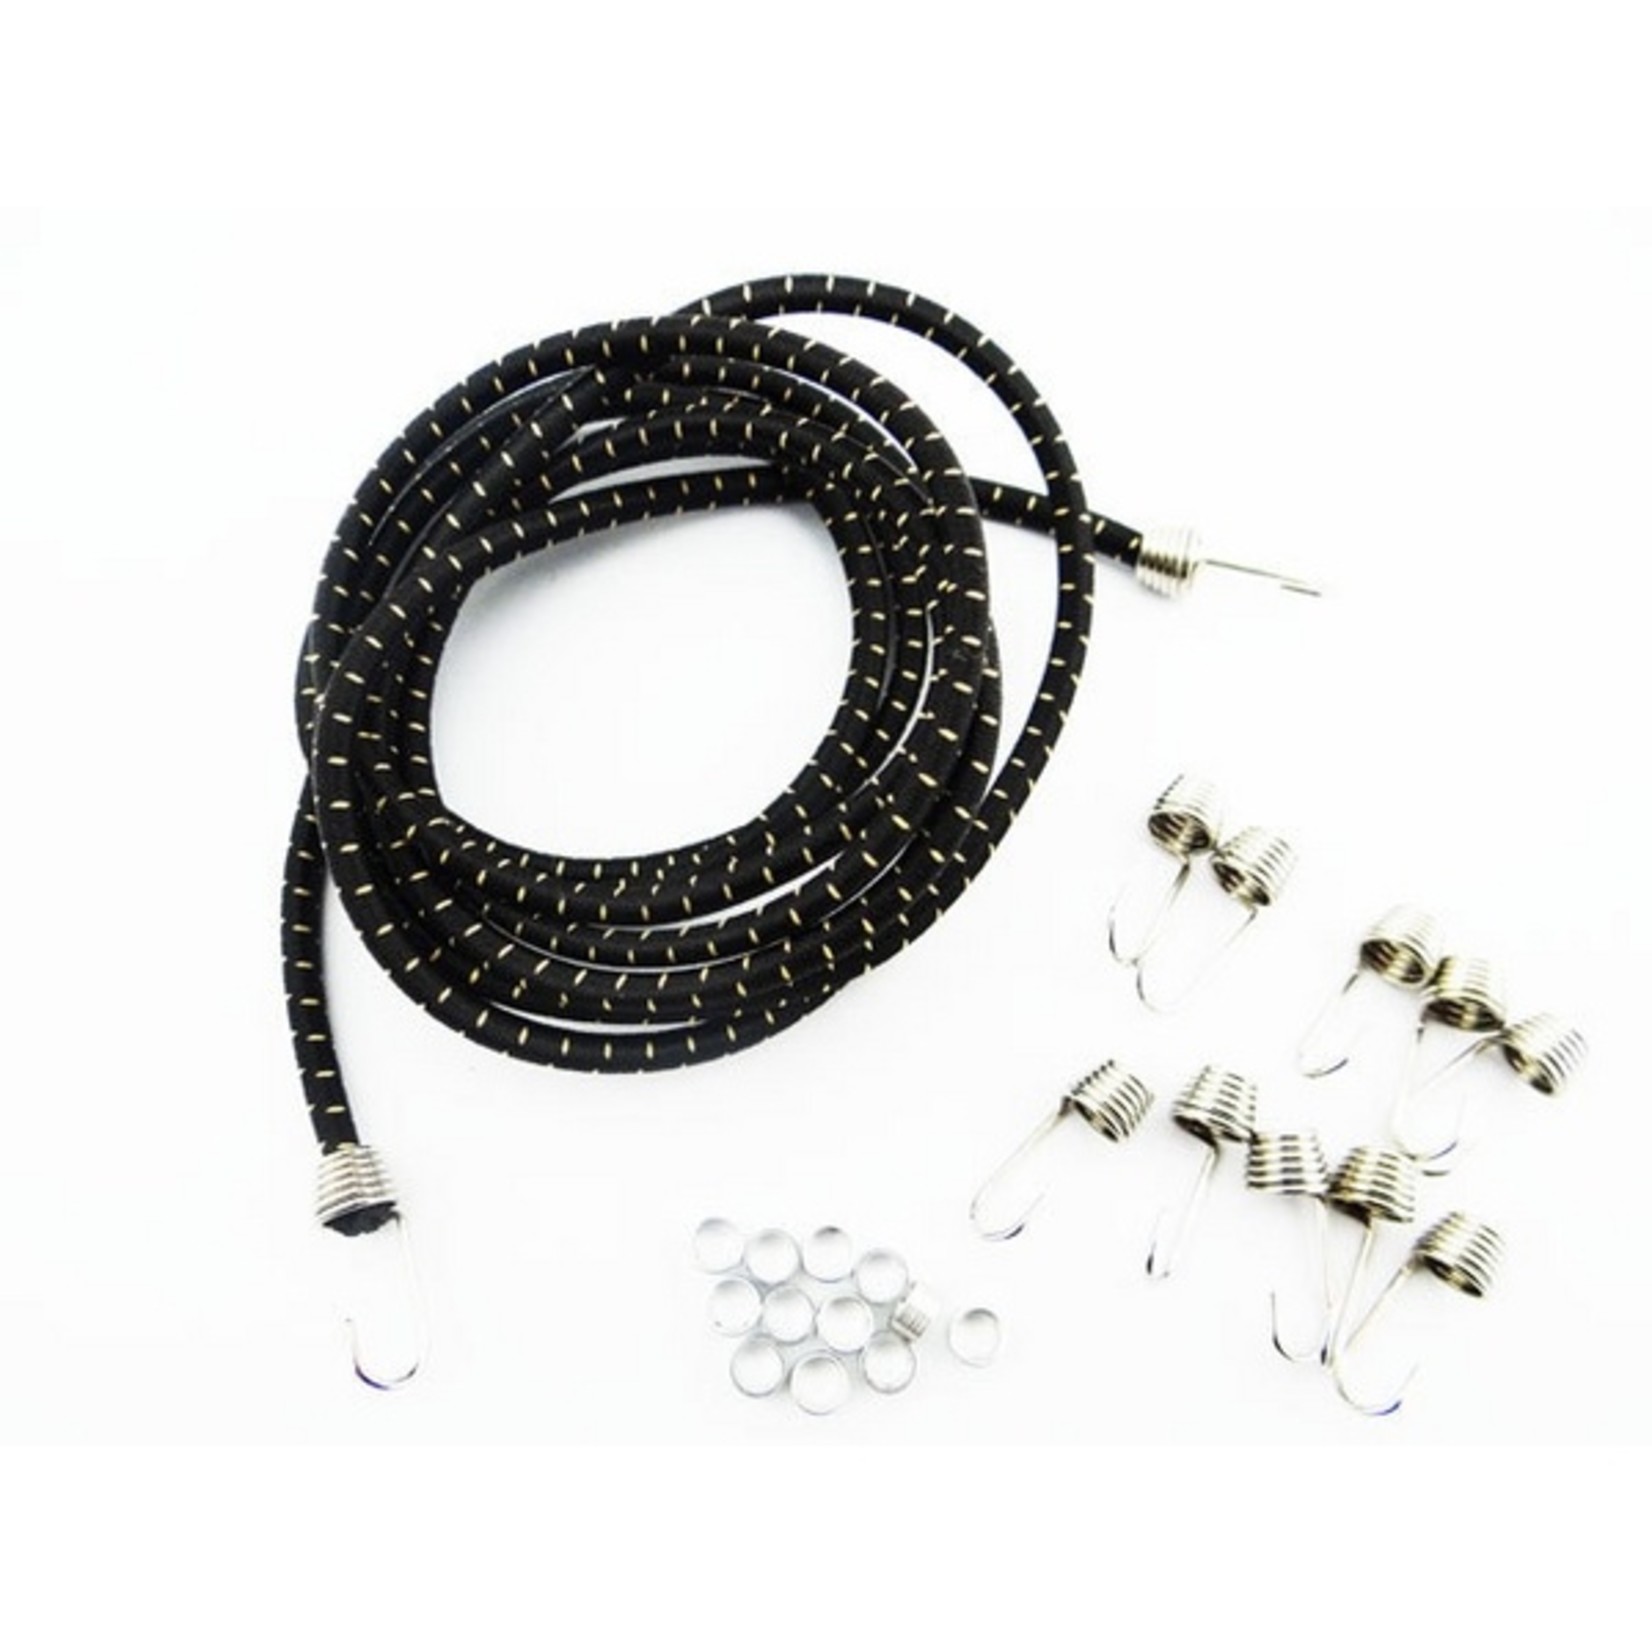 Hot Racing 1/10 Scale Black Bungee Cord Kit